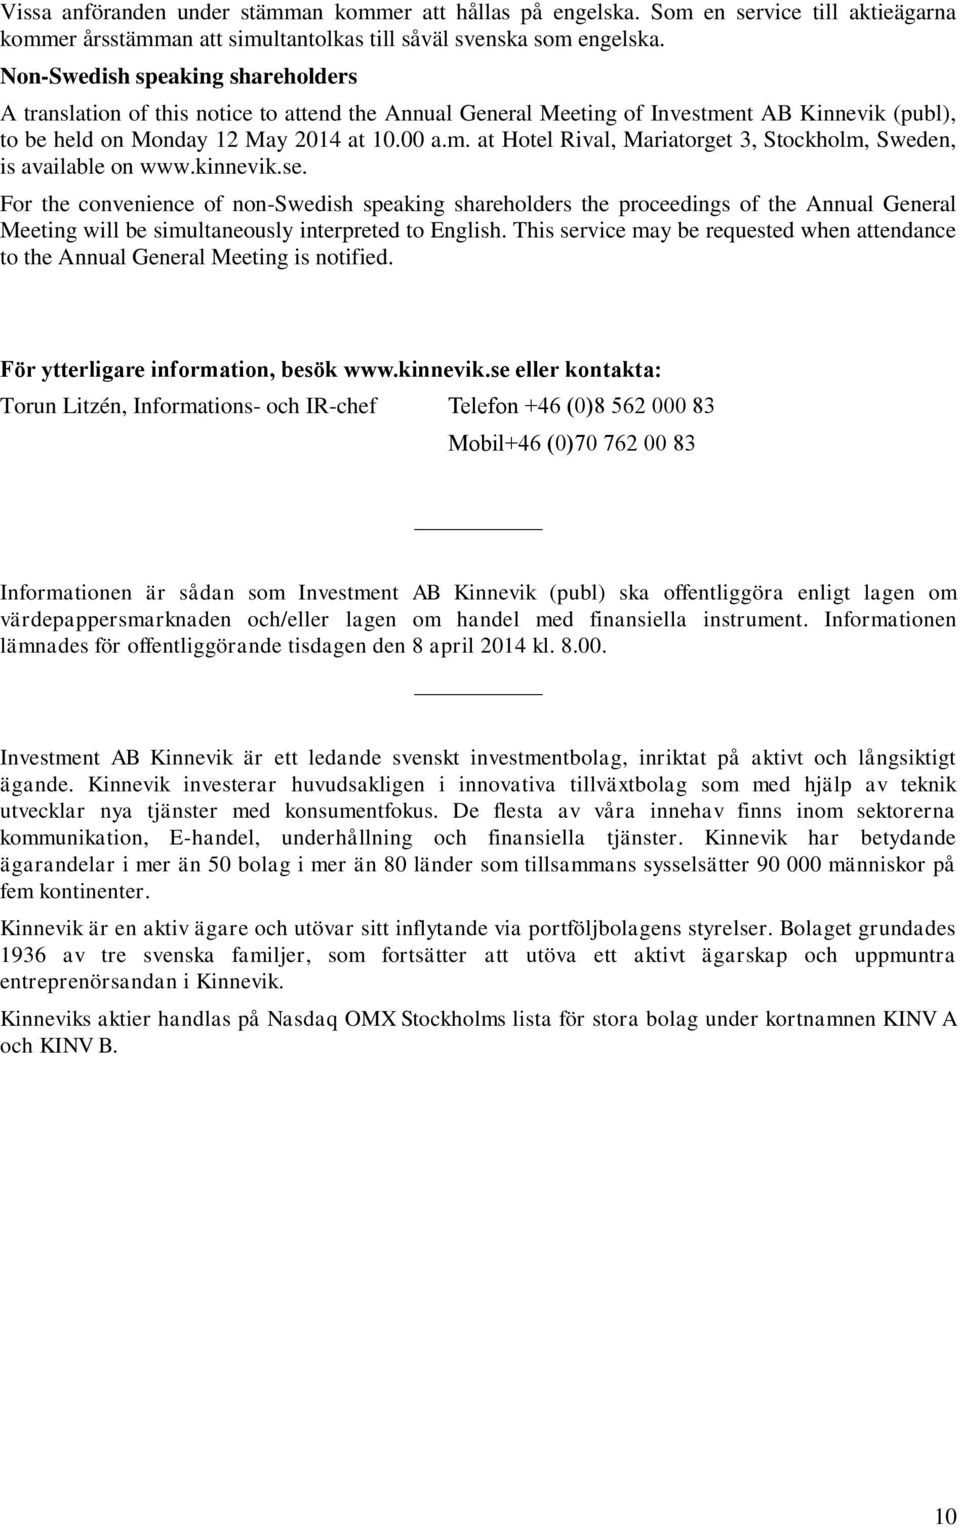 kinnevik.se. For the convenience of non-swedish speaking shareholders the proceedings of the Annual General Meeting will be simultaneously interpreted to English.